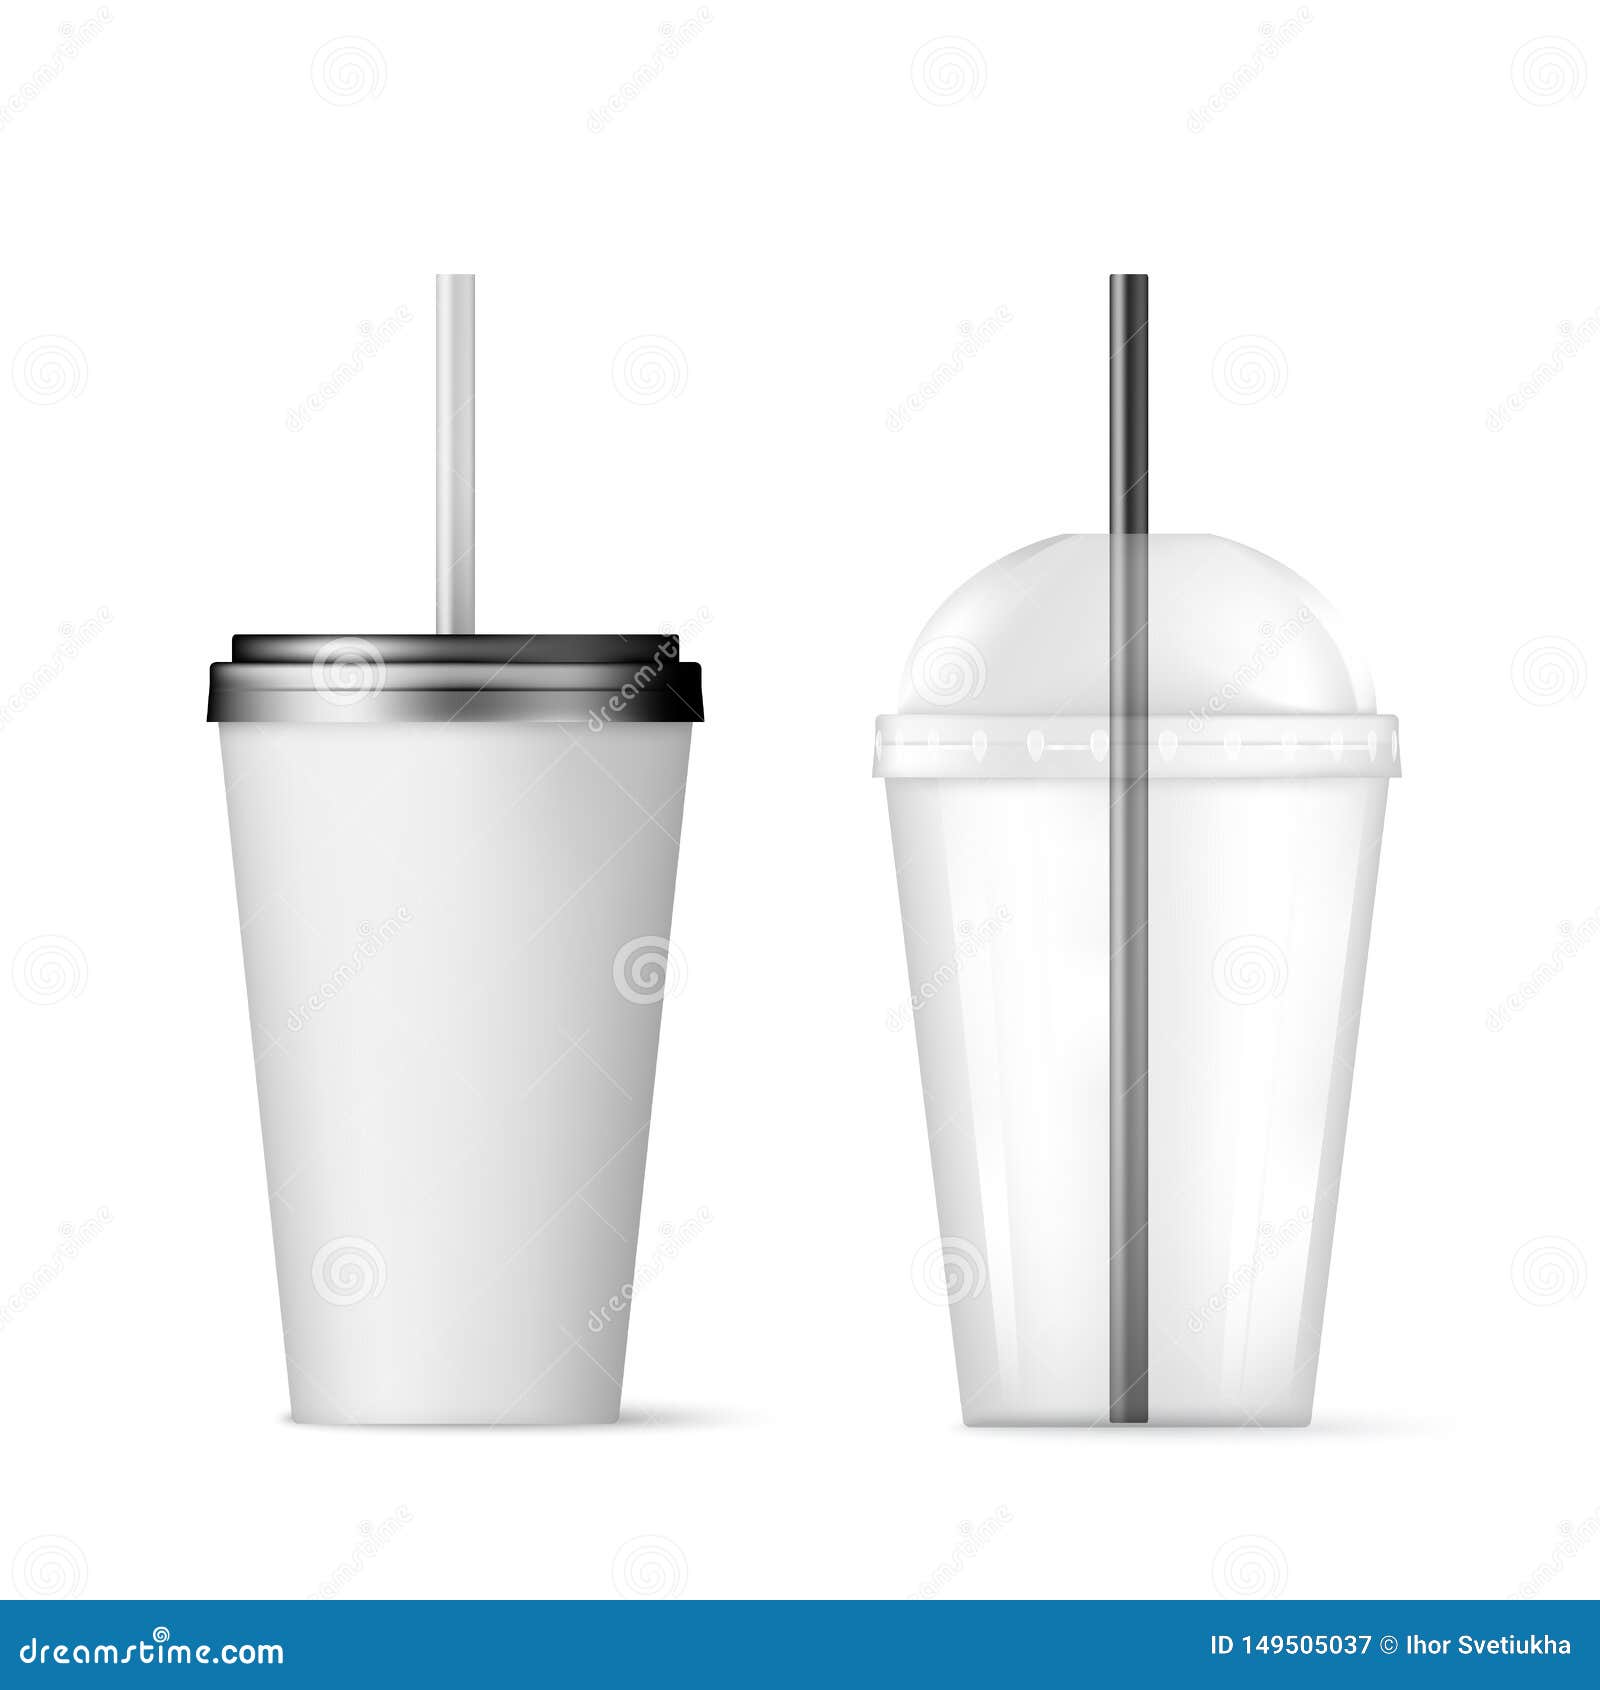 plastic transparent disposable cup with black straw for cocktail and disposable container with black lid for ice drink. 